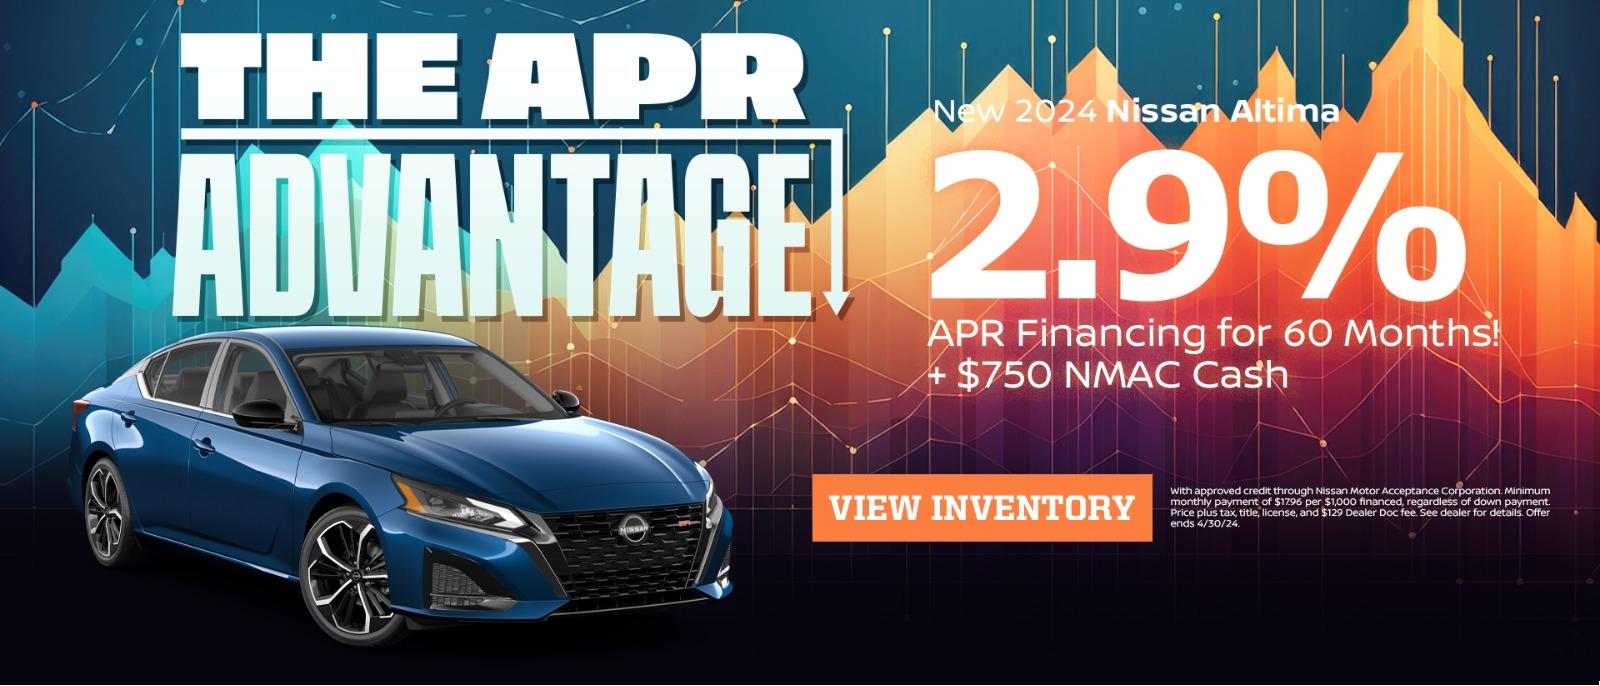 New 2024 Nissan Altima
2.9% APR Financing for 60 Months + $750 NMAC Cash